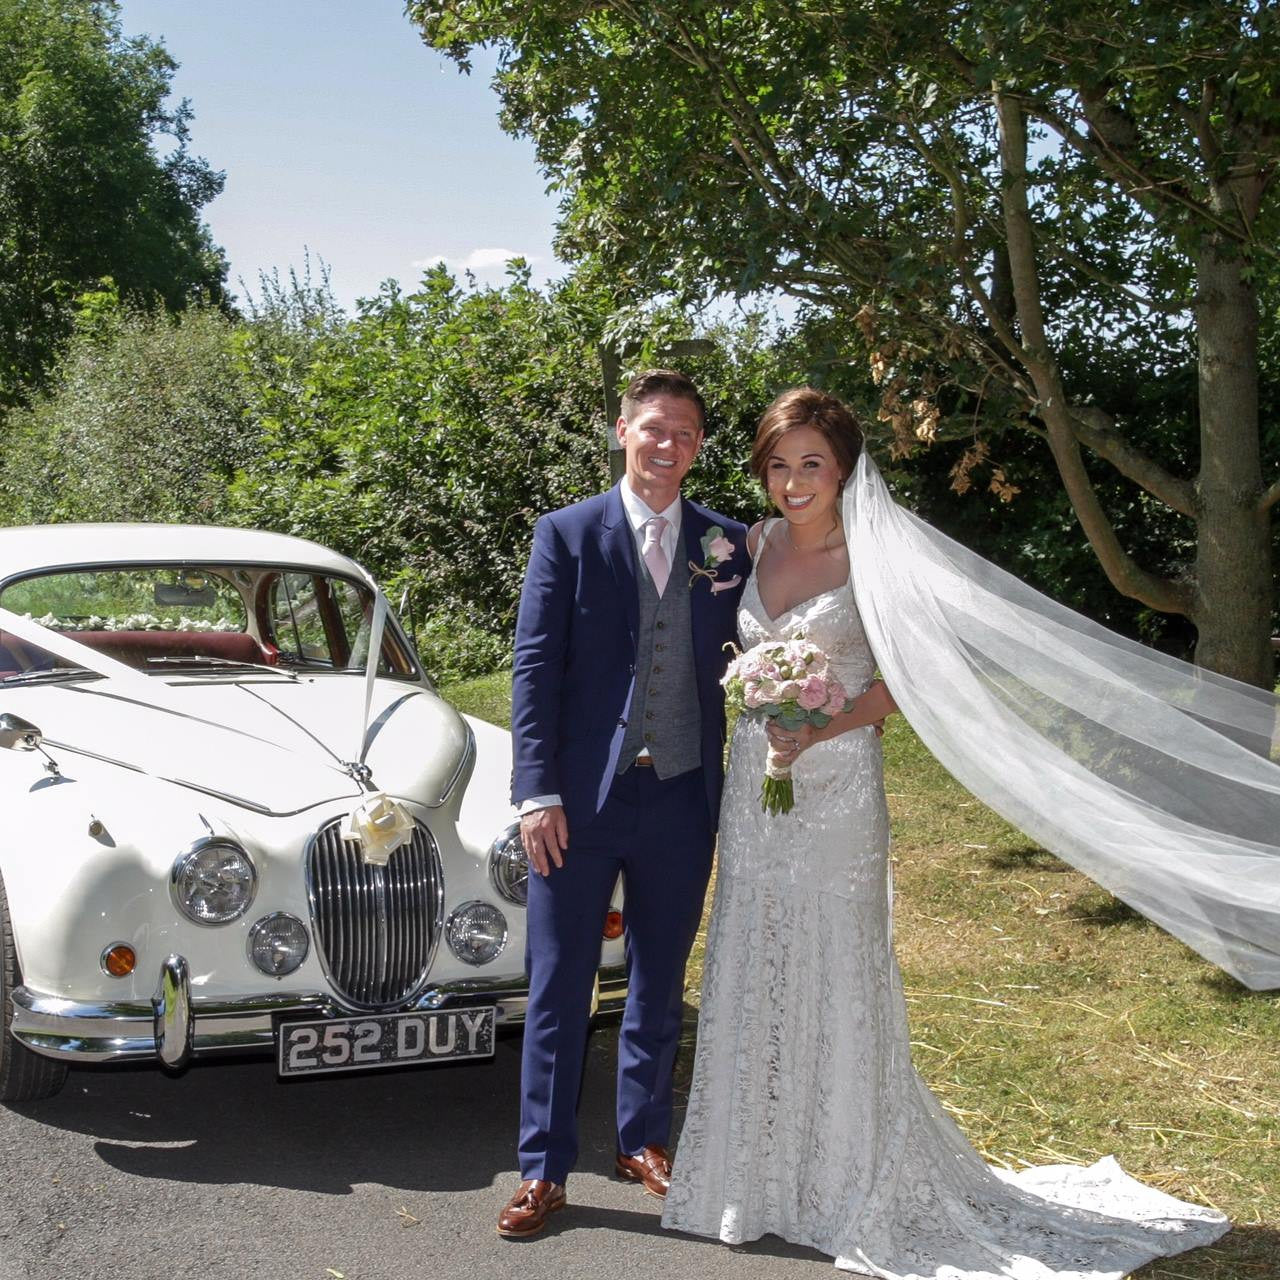 Bride and Groom with wedding car and wedding flowers.